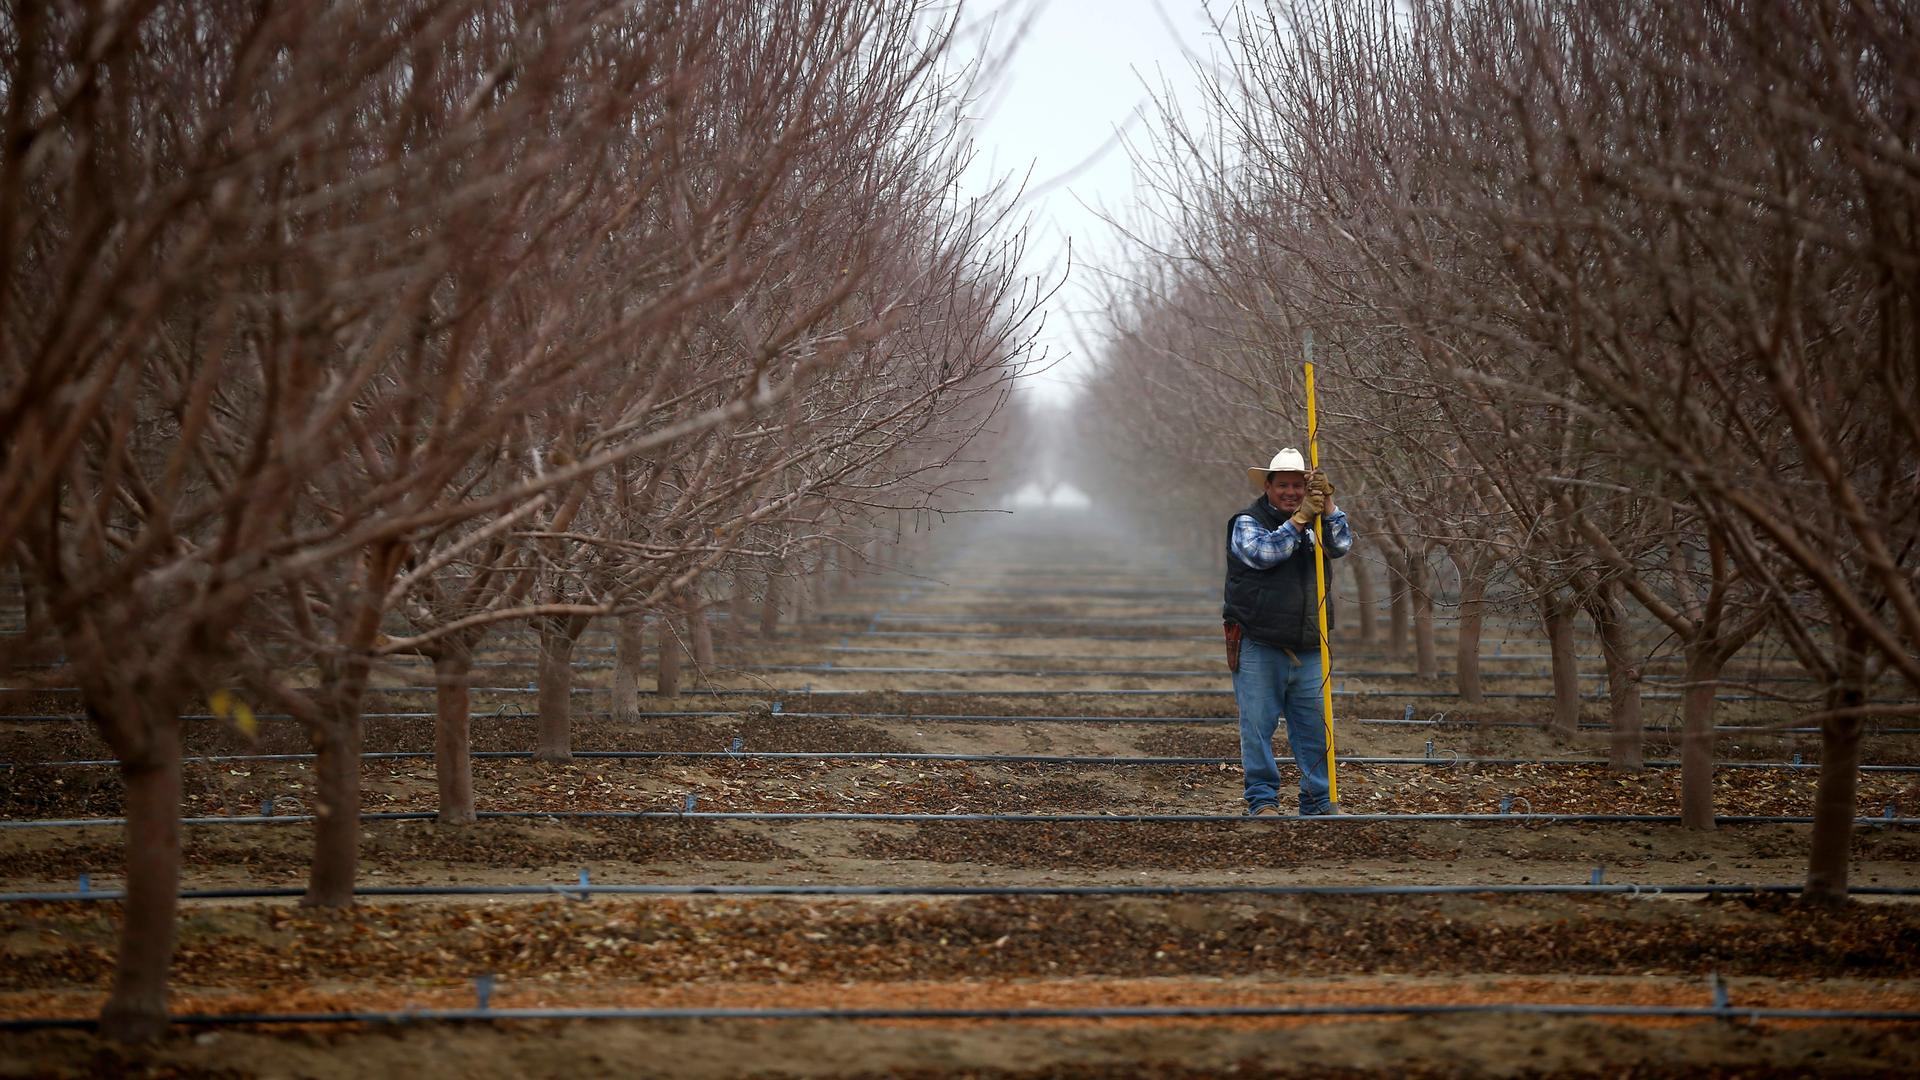 A worker prunes almond trees in an orchard near Bakersfield in the Central Valley, California, United States January 17, 2015.